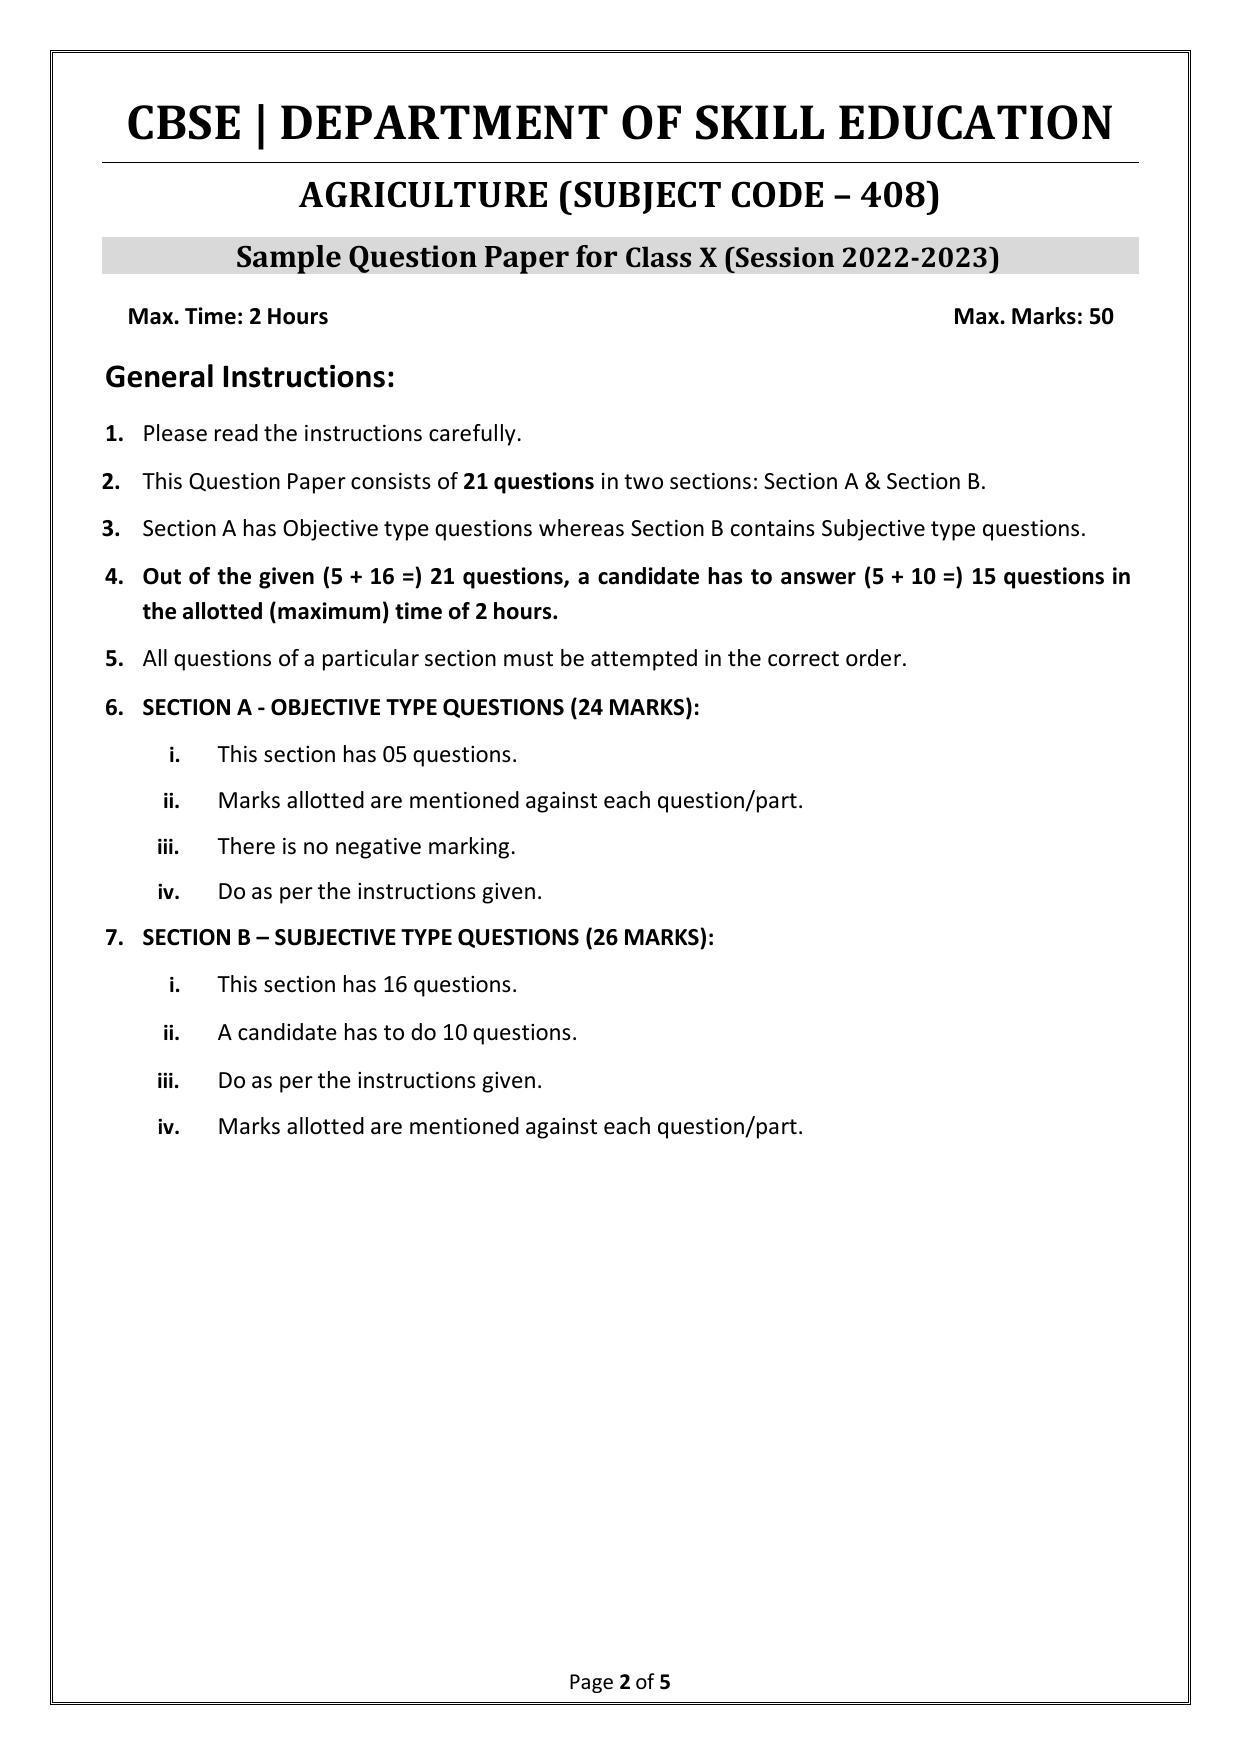 CBSE Class 10 (Skill Education) Agriculture Sample Papers 2023 - Page 2